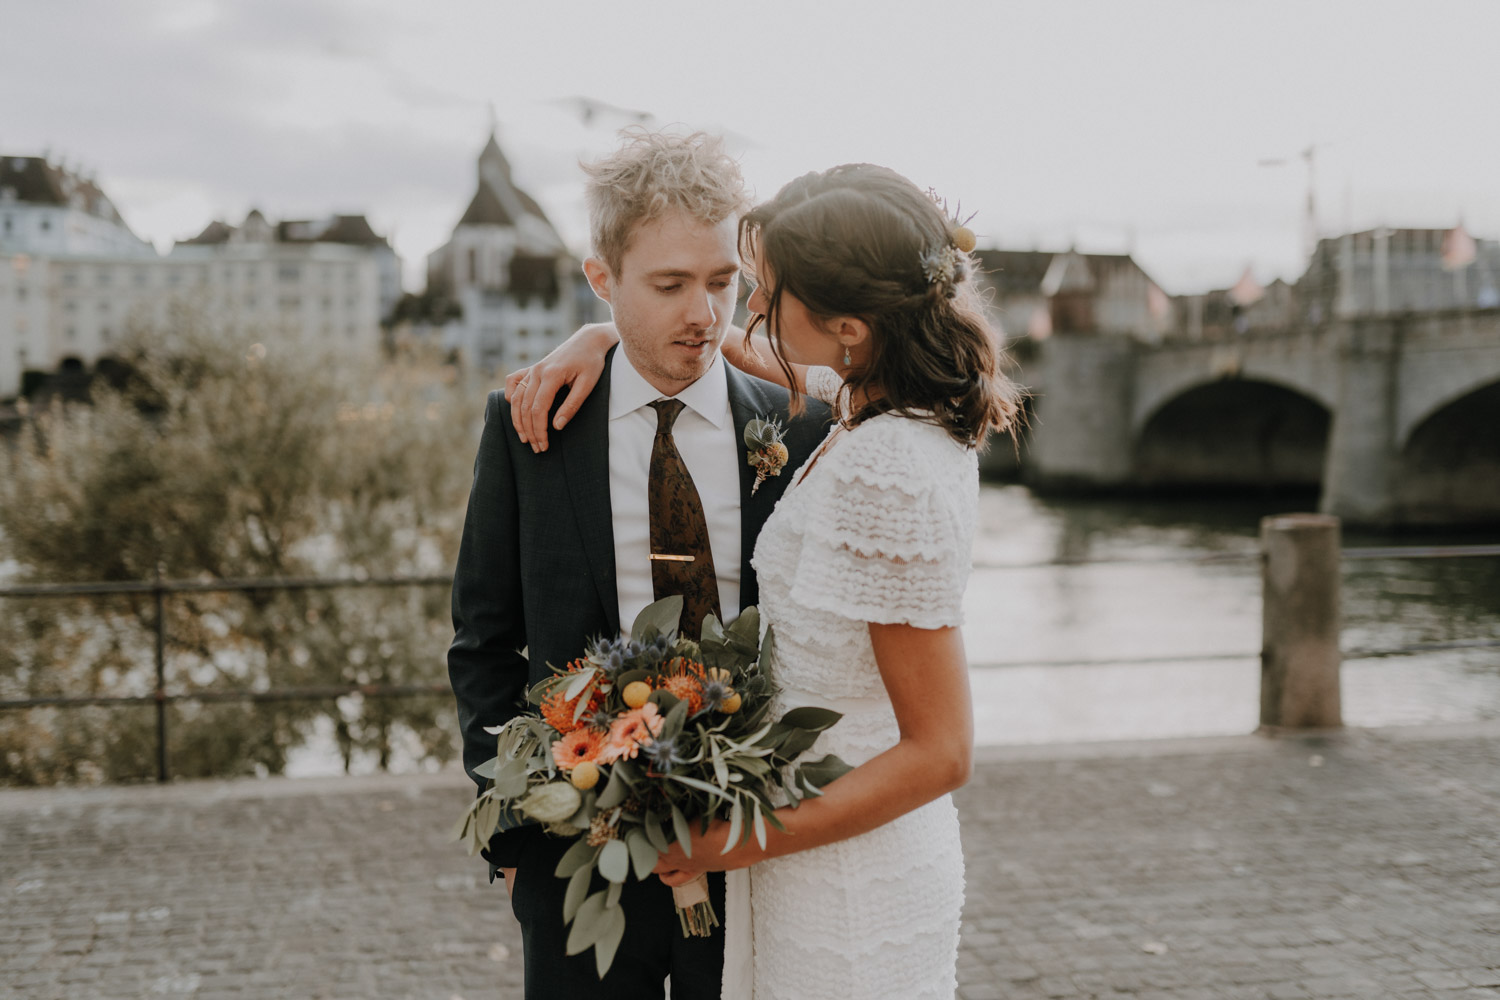 A modern urban civil wedding in the city of Basel in Switzerland photographed by a wedding photographer in Switzerland